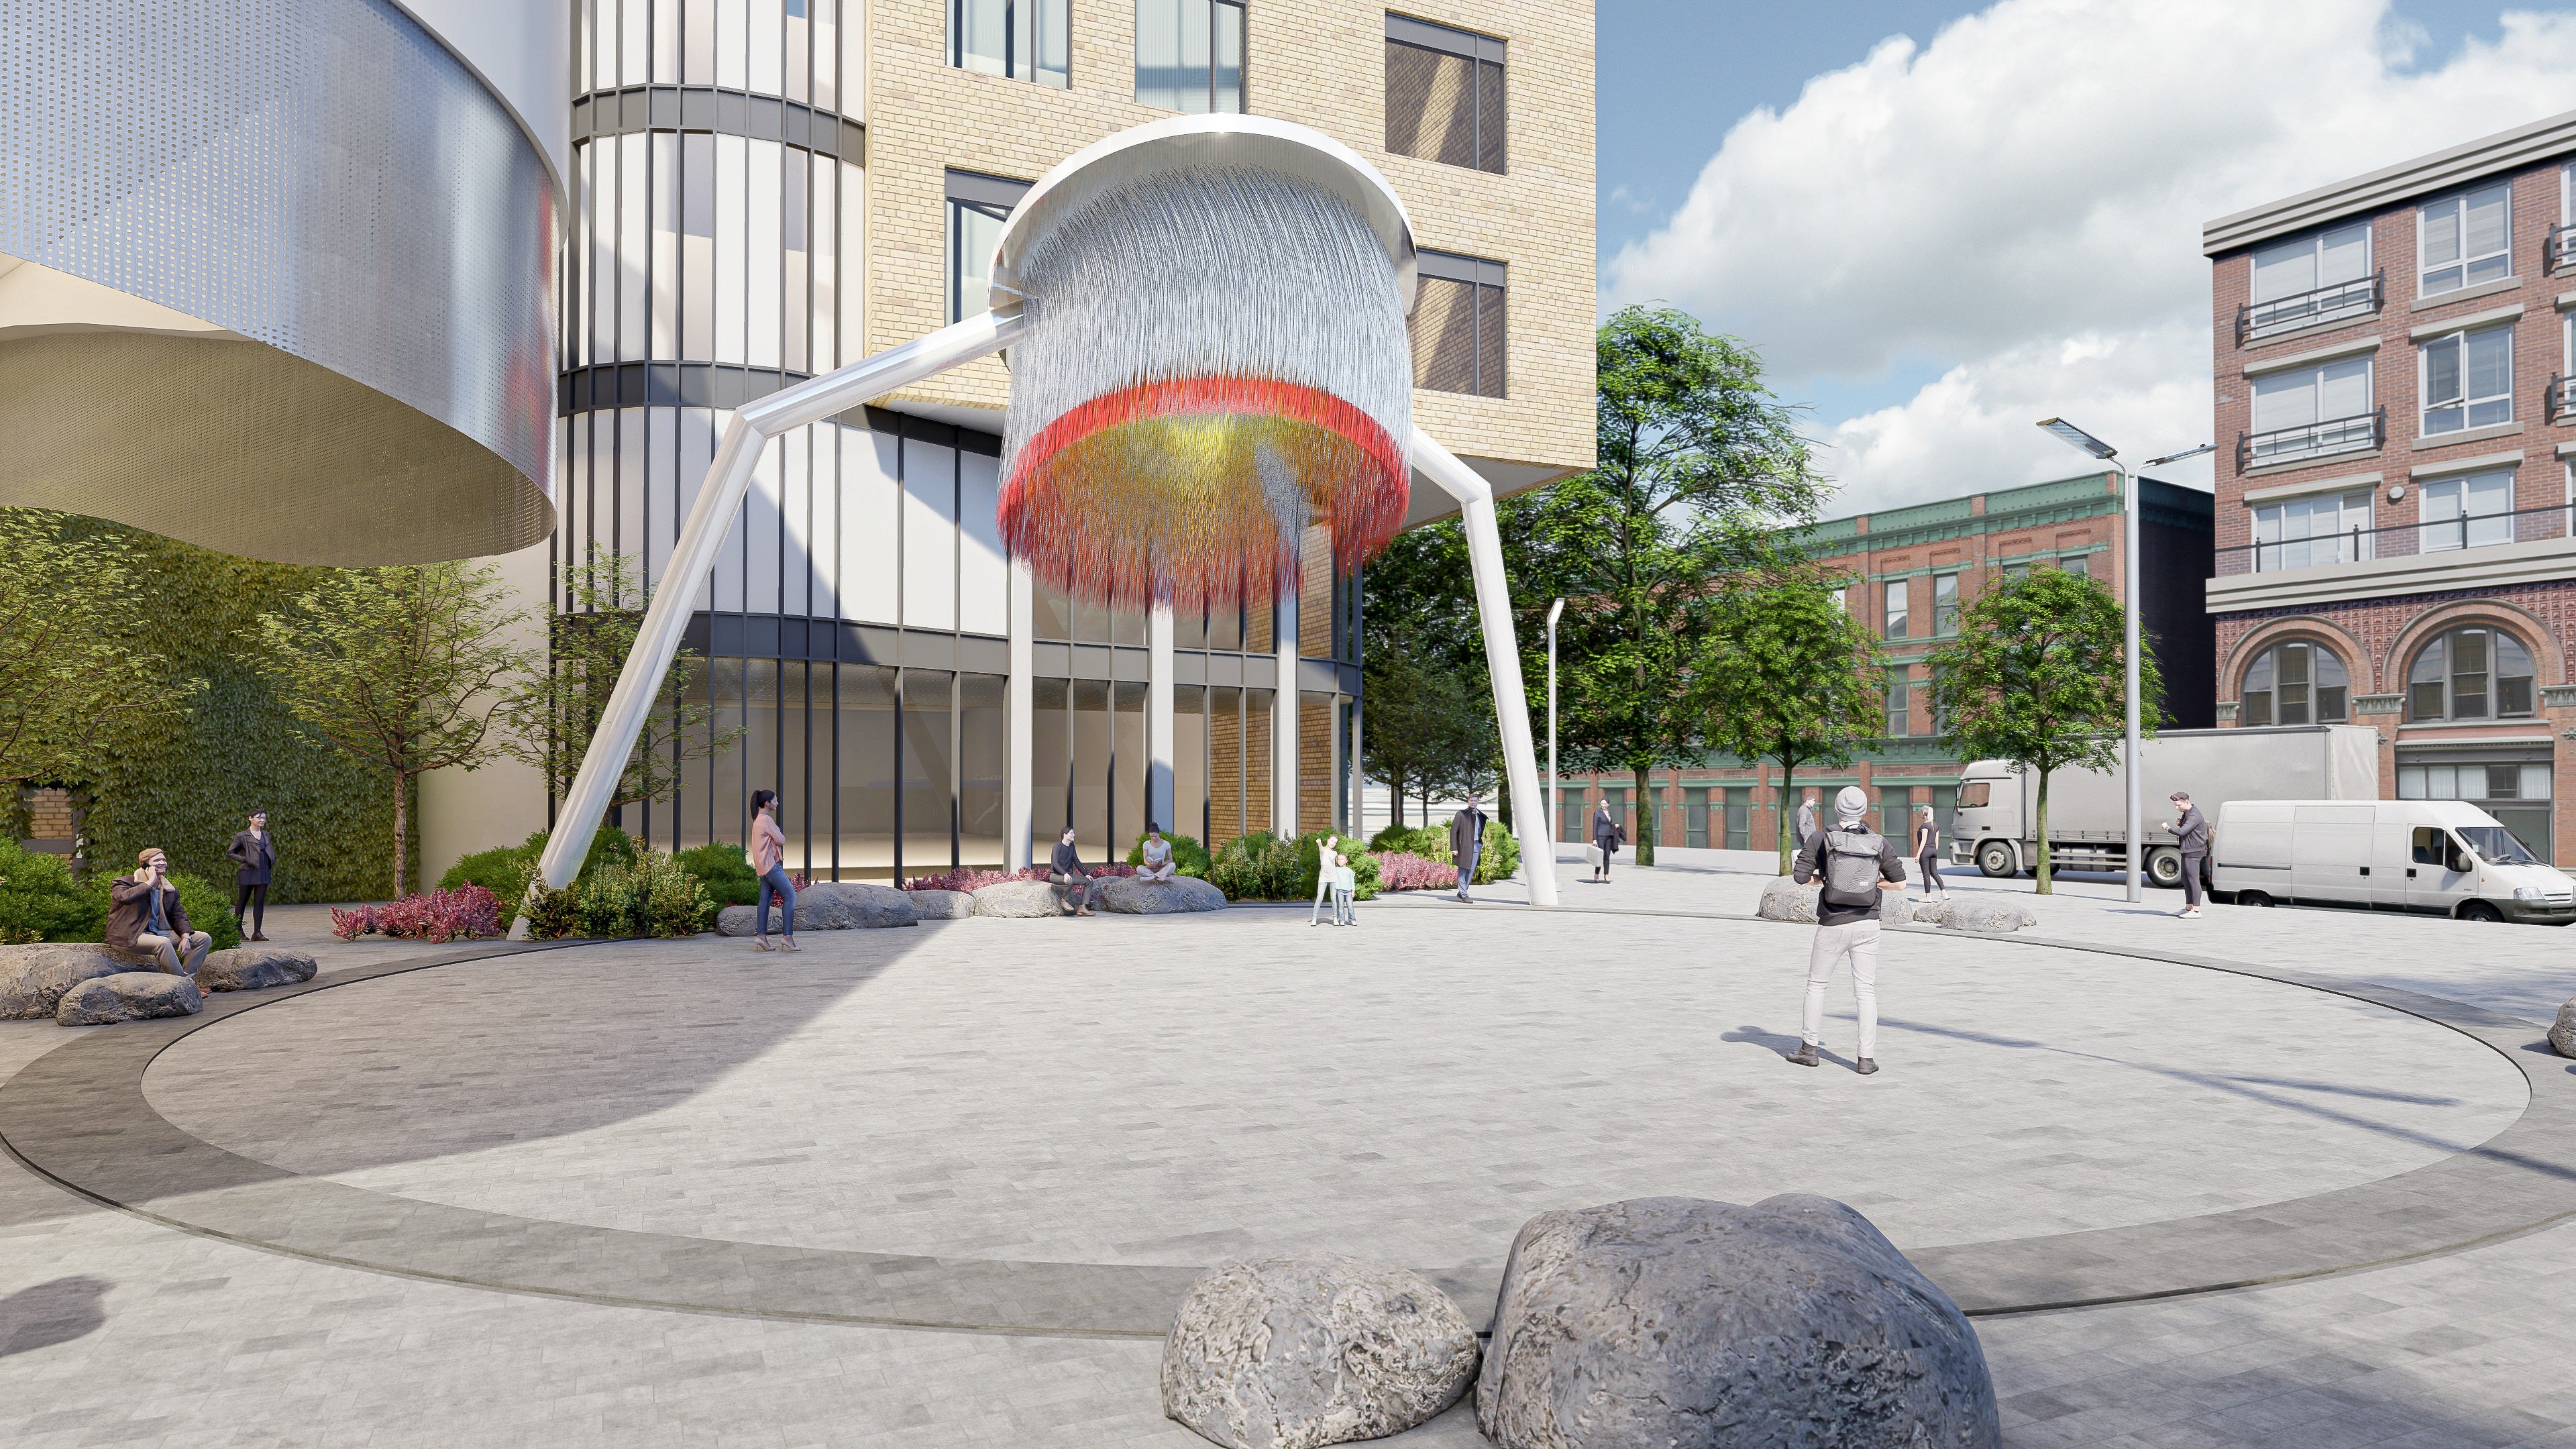 A rendering showing a public art sculpture on the exterior of a building